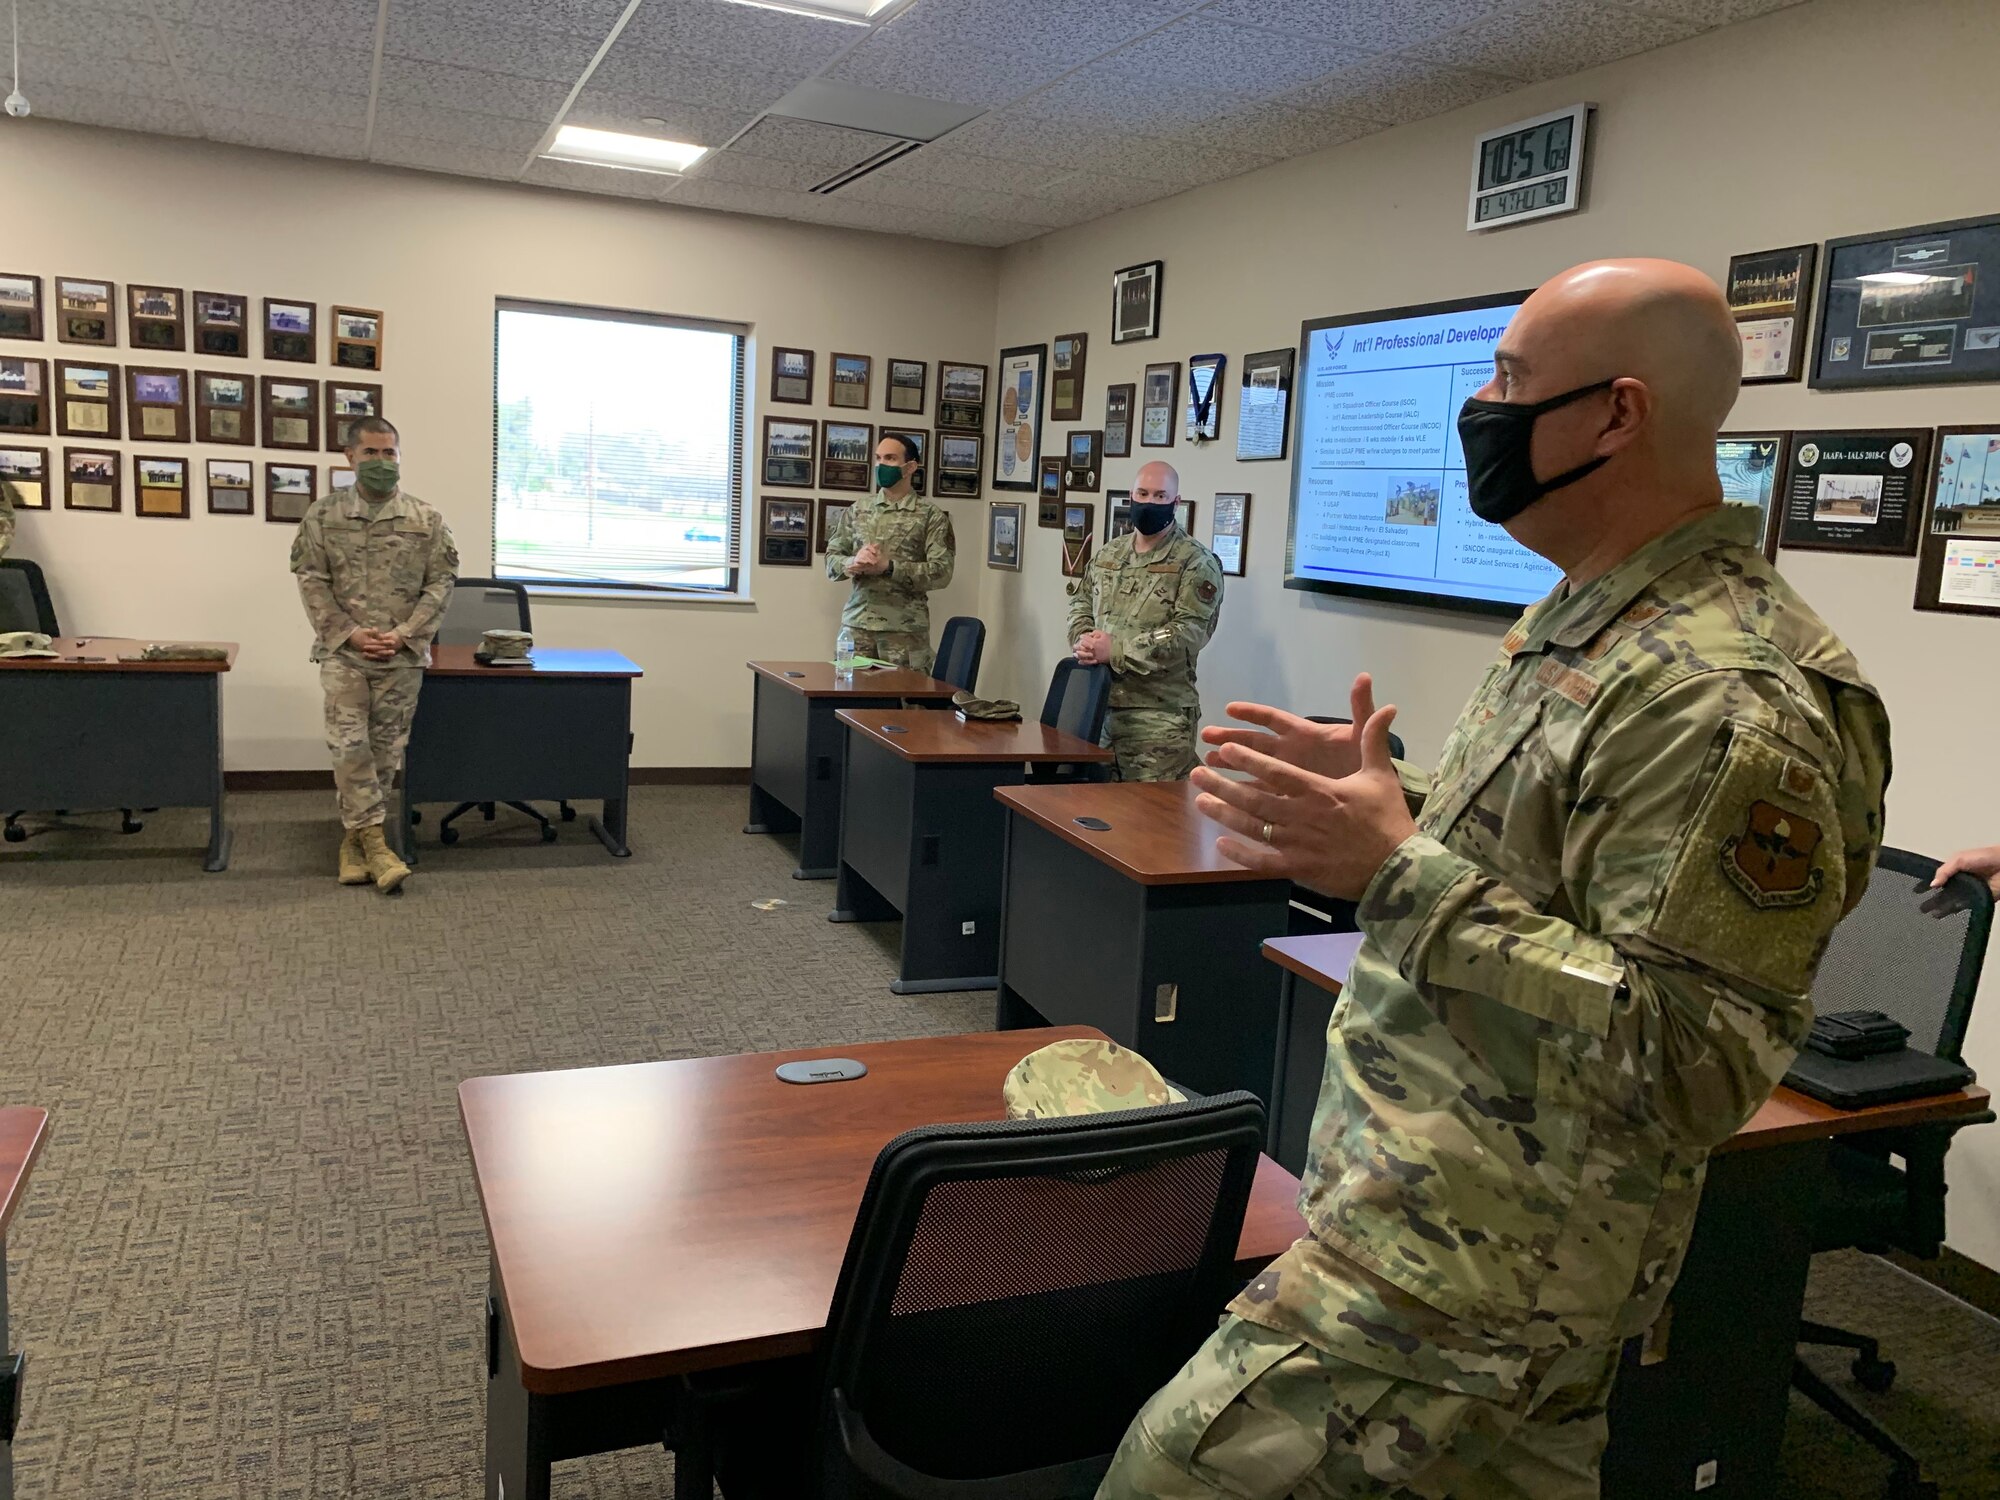 JOINT BASE SAN ANTONIO-LACKLAND, Texas -- Inter-American Air Forces Academy leaders met with the Air Education and Training Command Director of Intelligence during his first visit here at IAAFA, March 4, 2021.